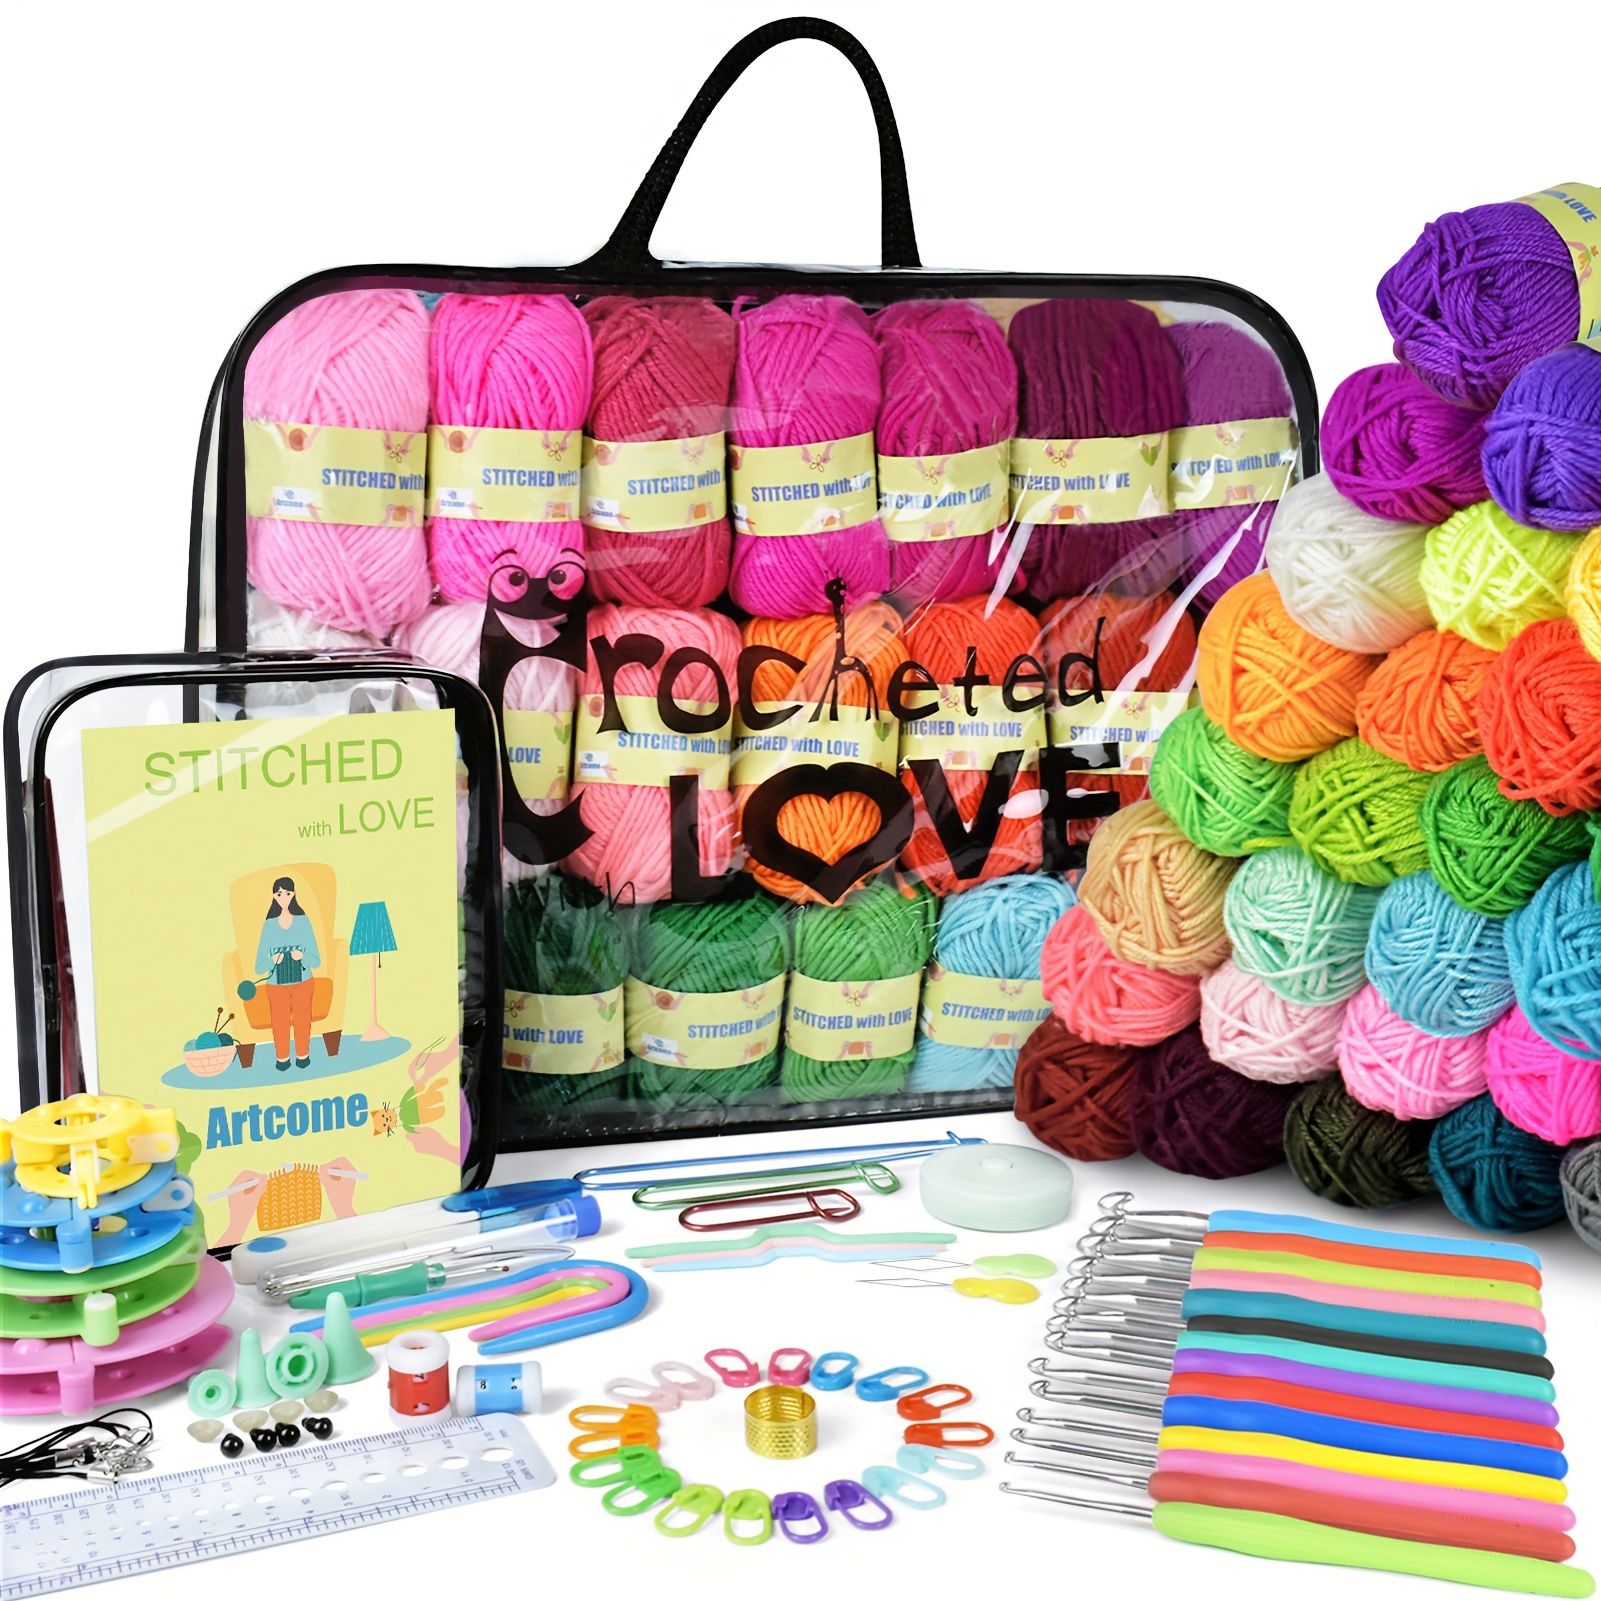 

ultimate Crafting" Complete Crochet Kit For Beginners & Experts - 155 Pcs With 42 Vibrant Yarn Colors, 14 Hook Sizes, Accessories & Storage Bags - Perfect For All Seasons Crafting